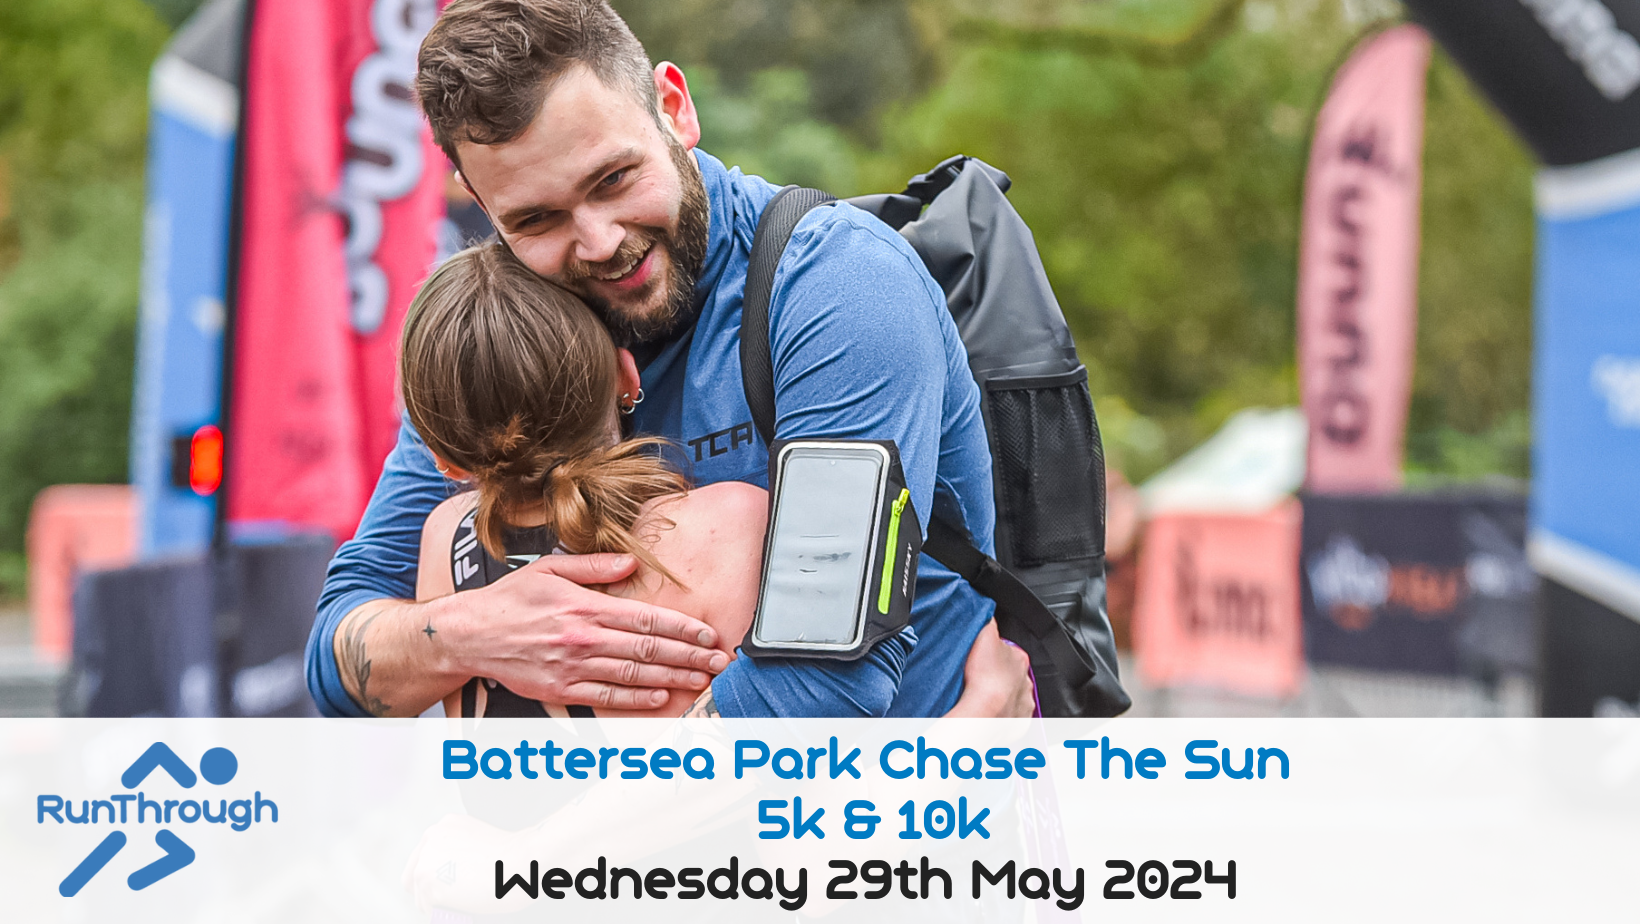 Image for RunThrough Battersea Park Chase The Sun 5k